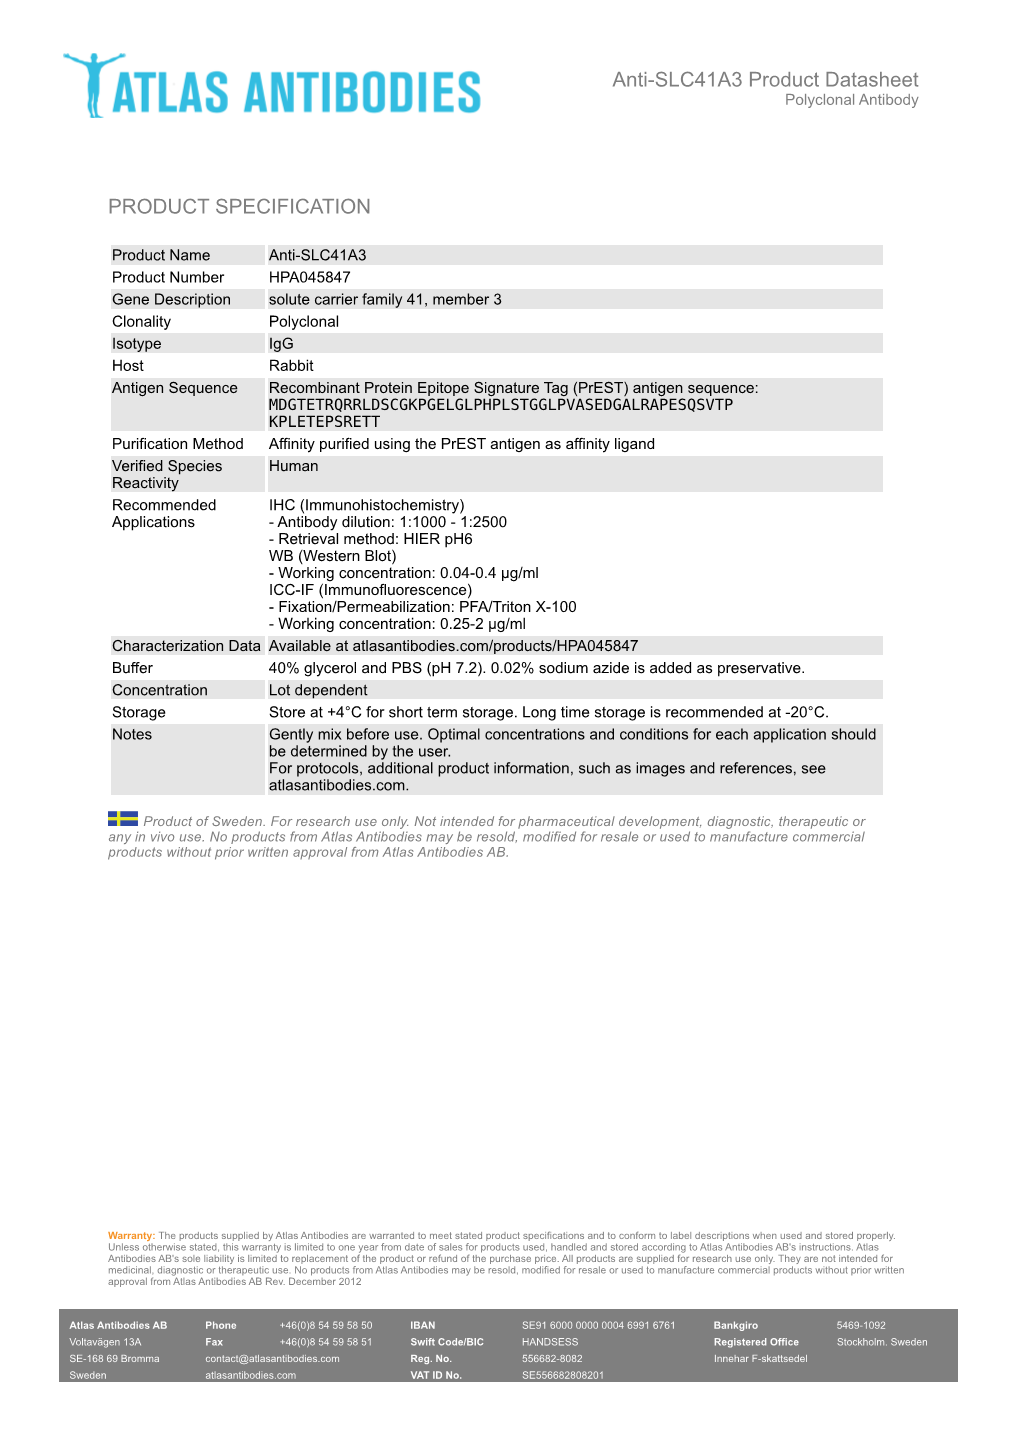 PRODUCT SPECIFICATION Anti-SLC41A3 Product Datasheet